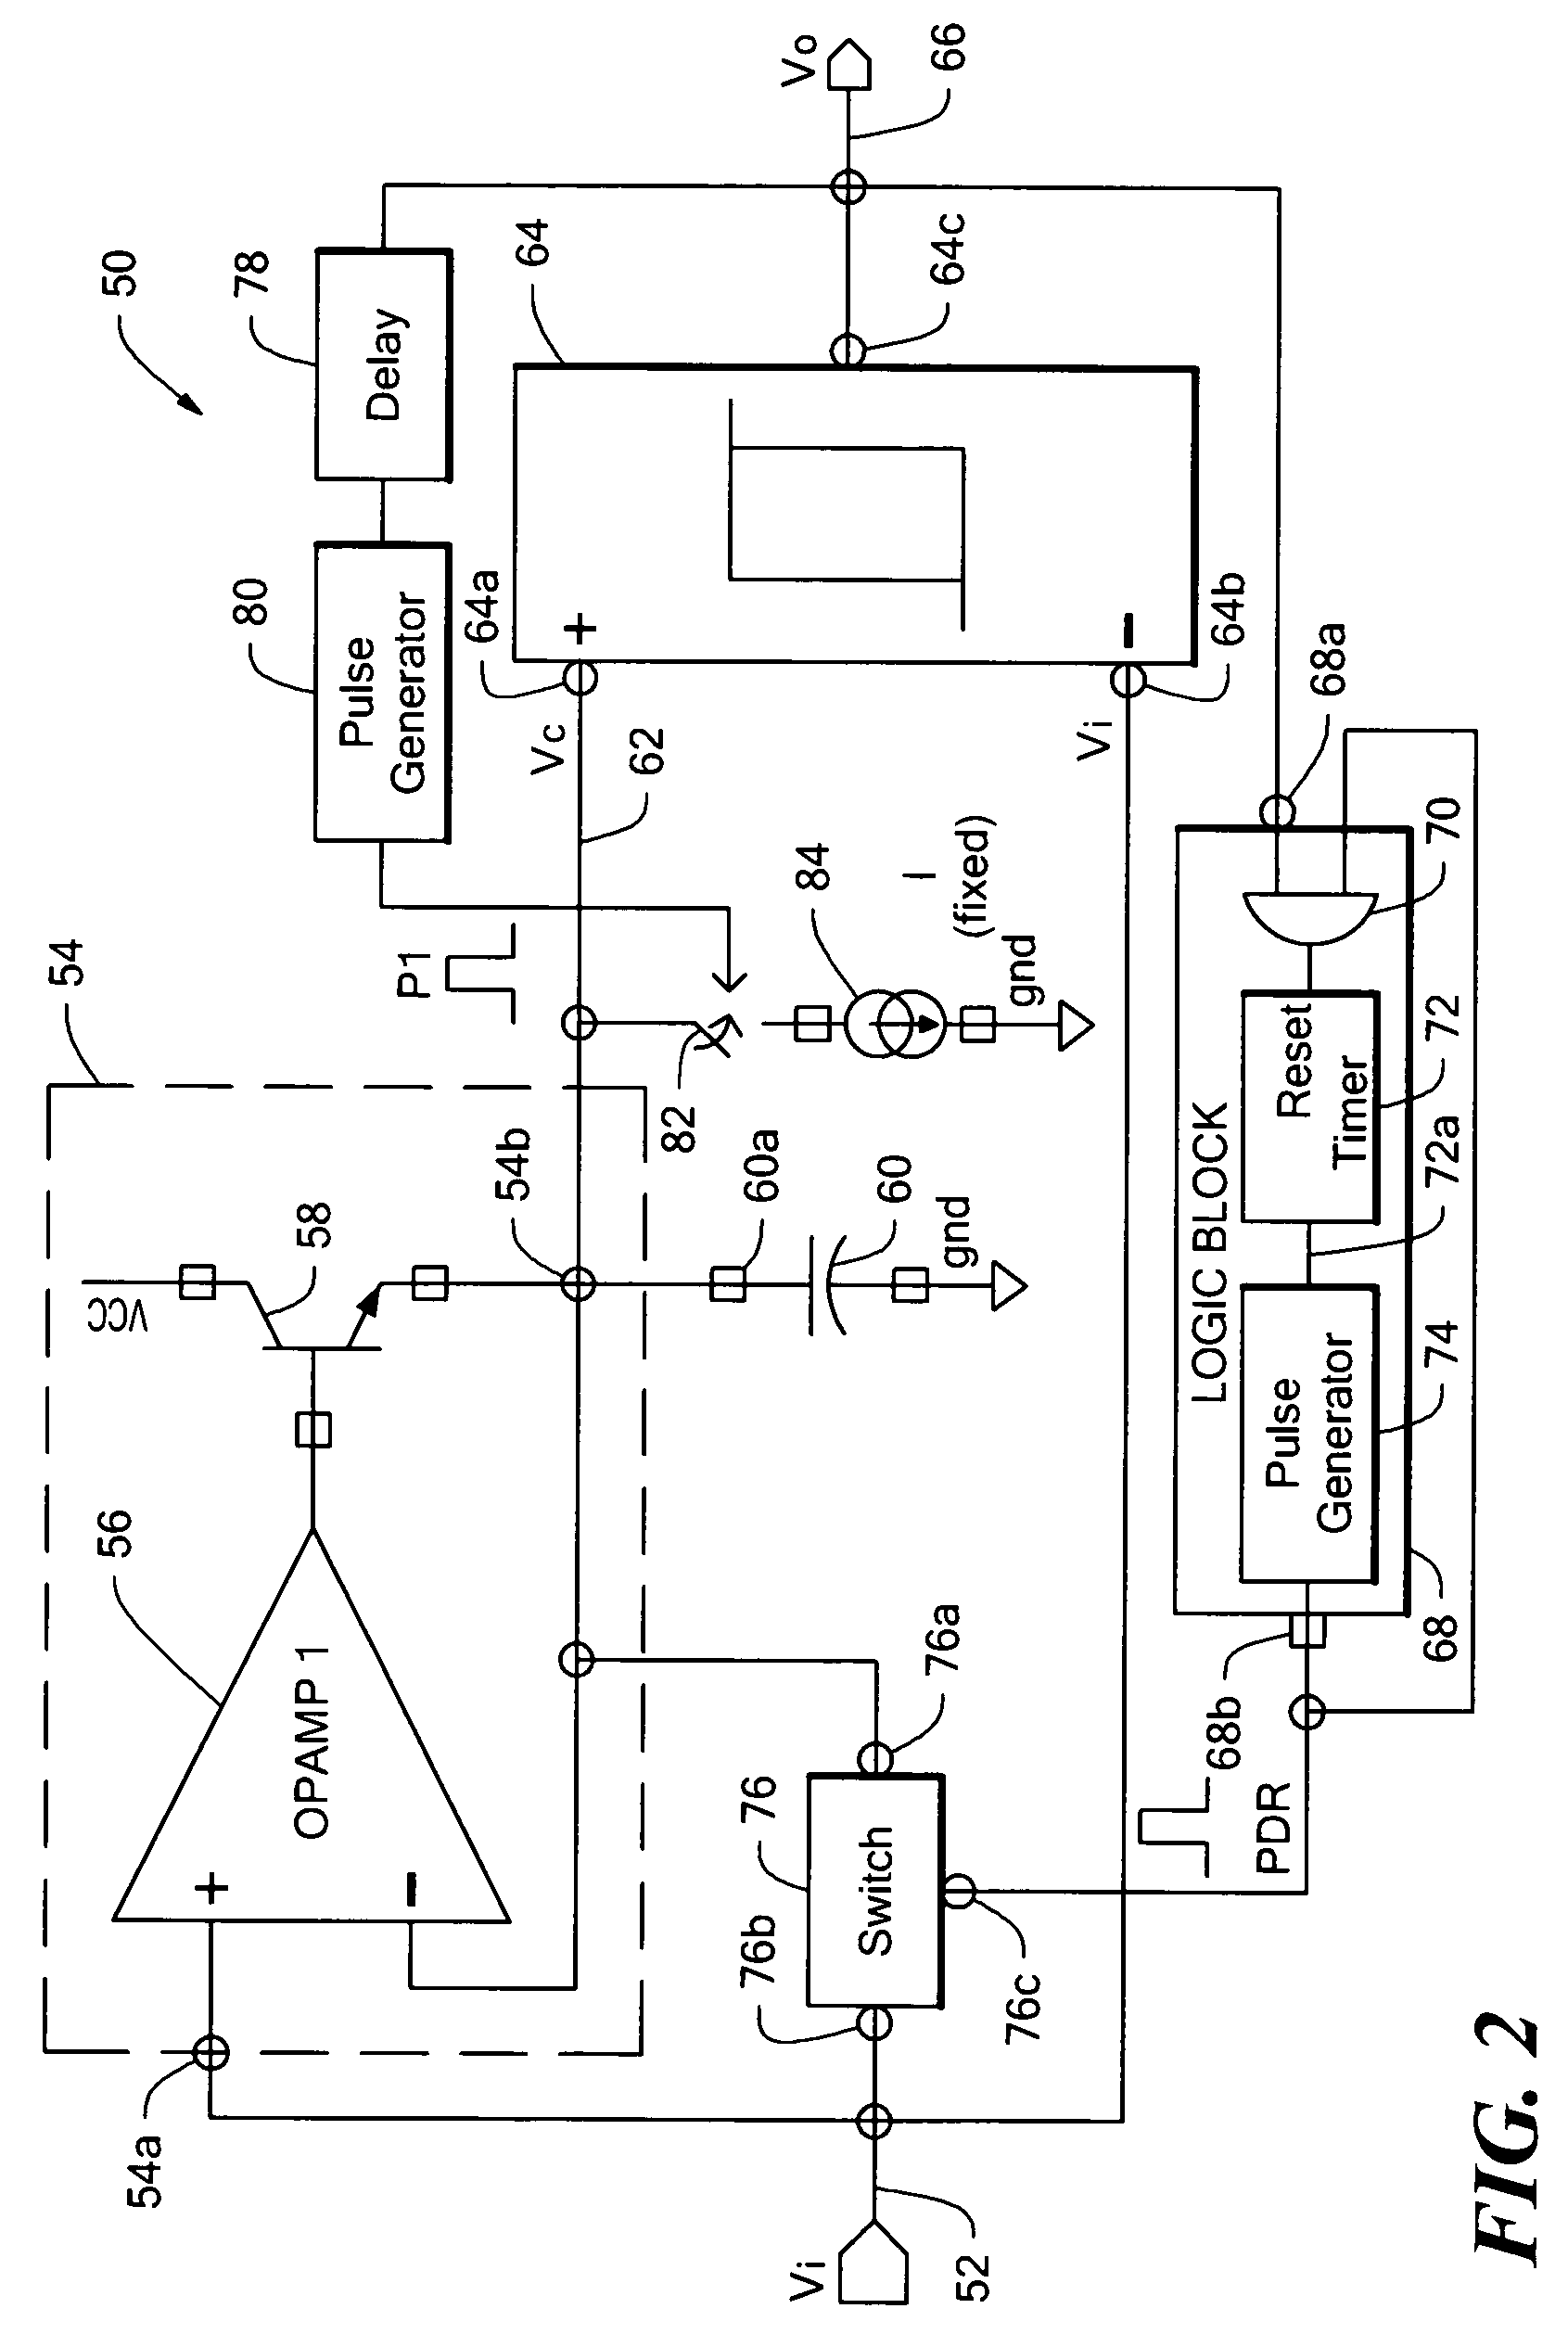 Track-and-hold peak detector circuit